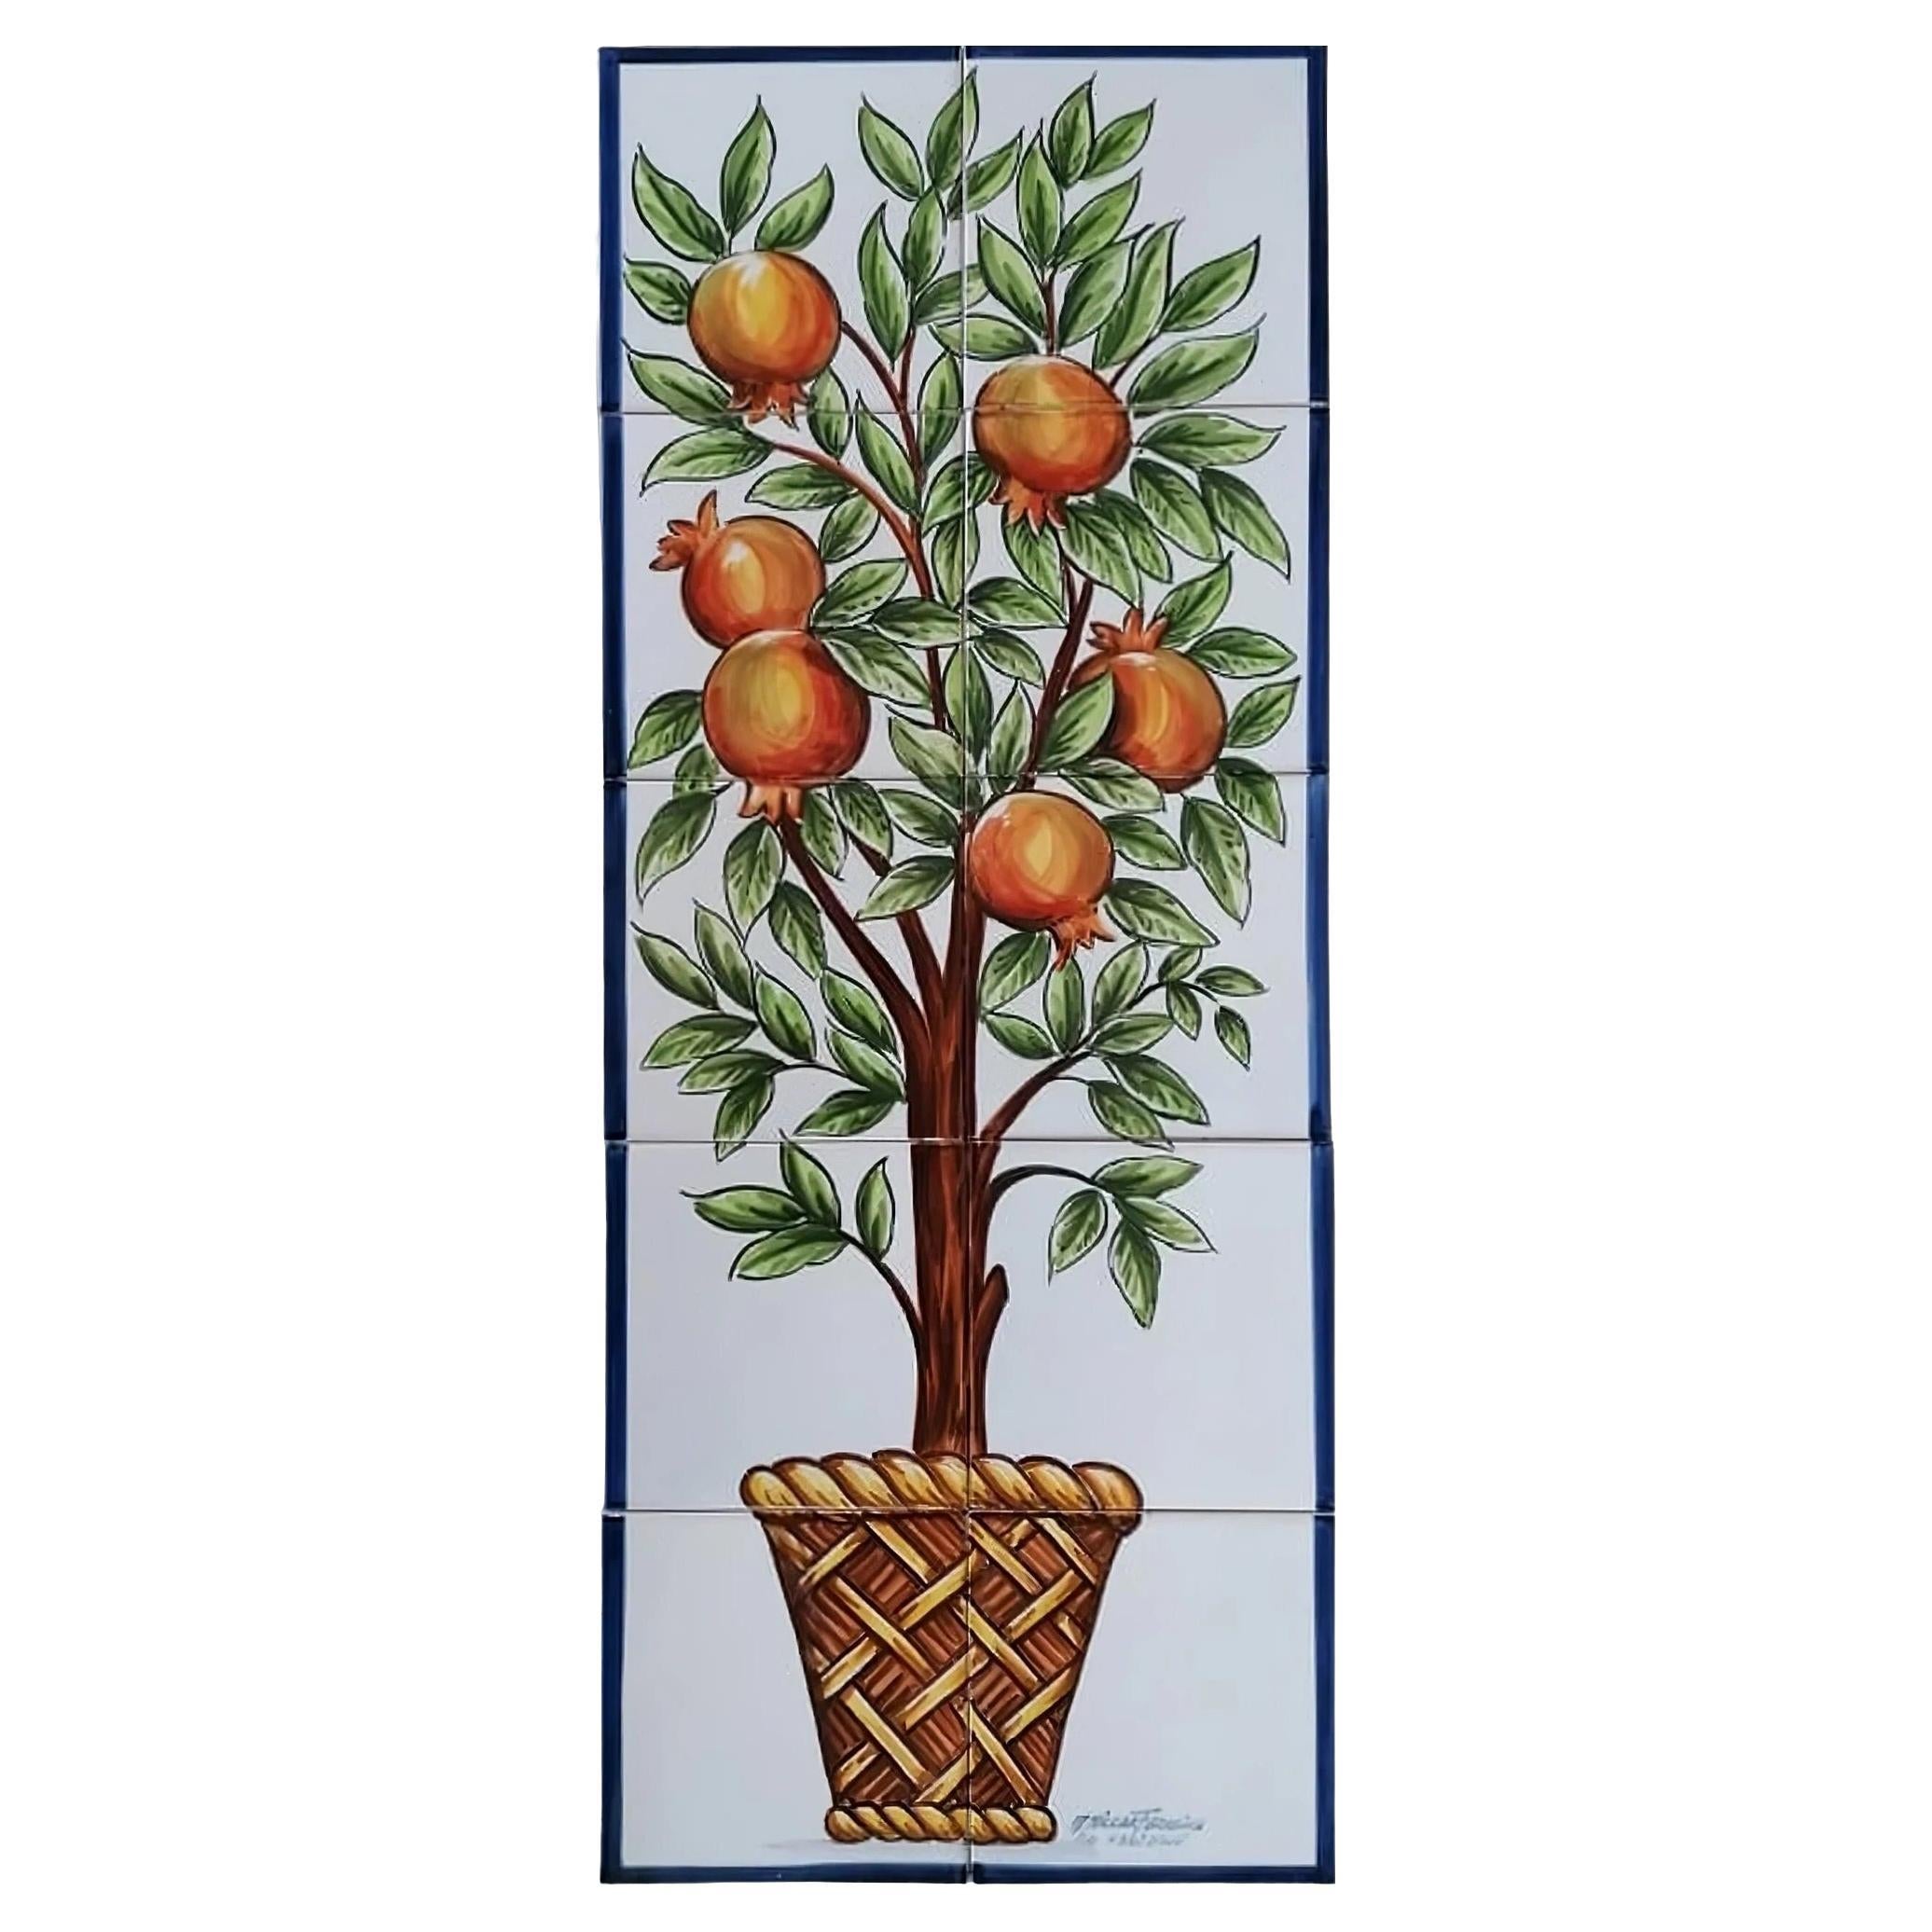 Azulejos Portuguese Hand Painted Tile Mural "Pomegranate Tree" Signed by Artist For Sale